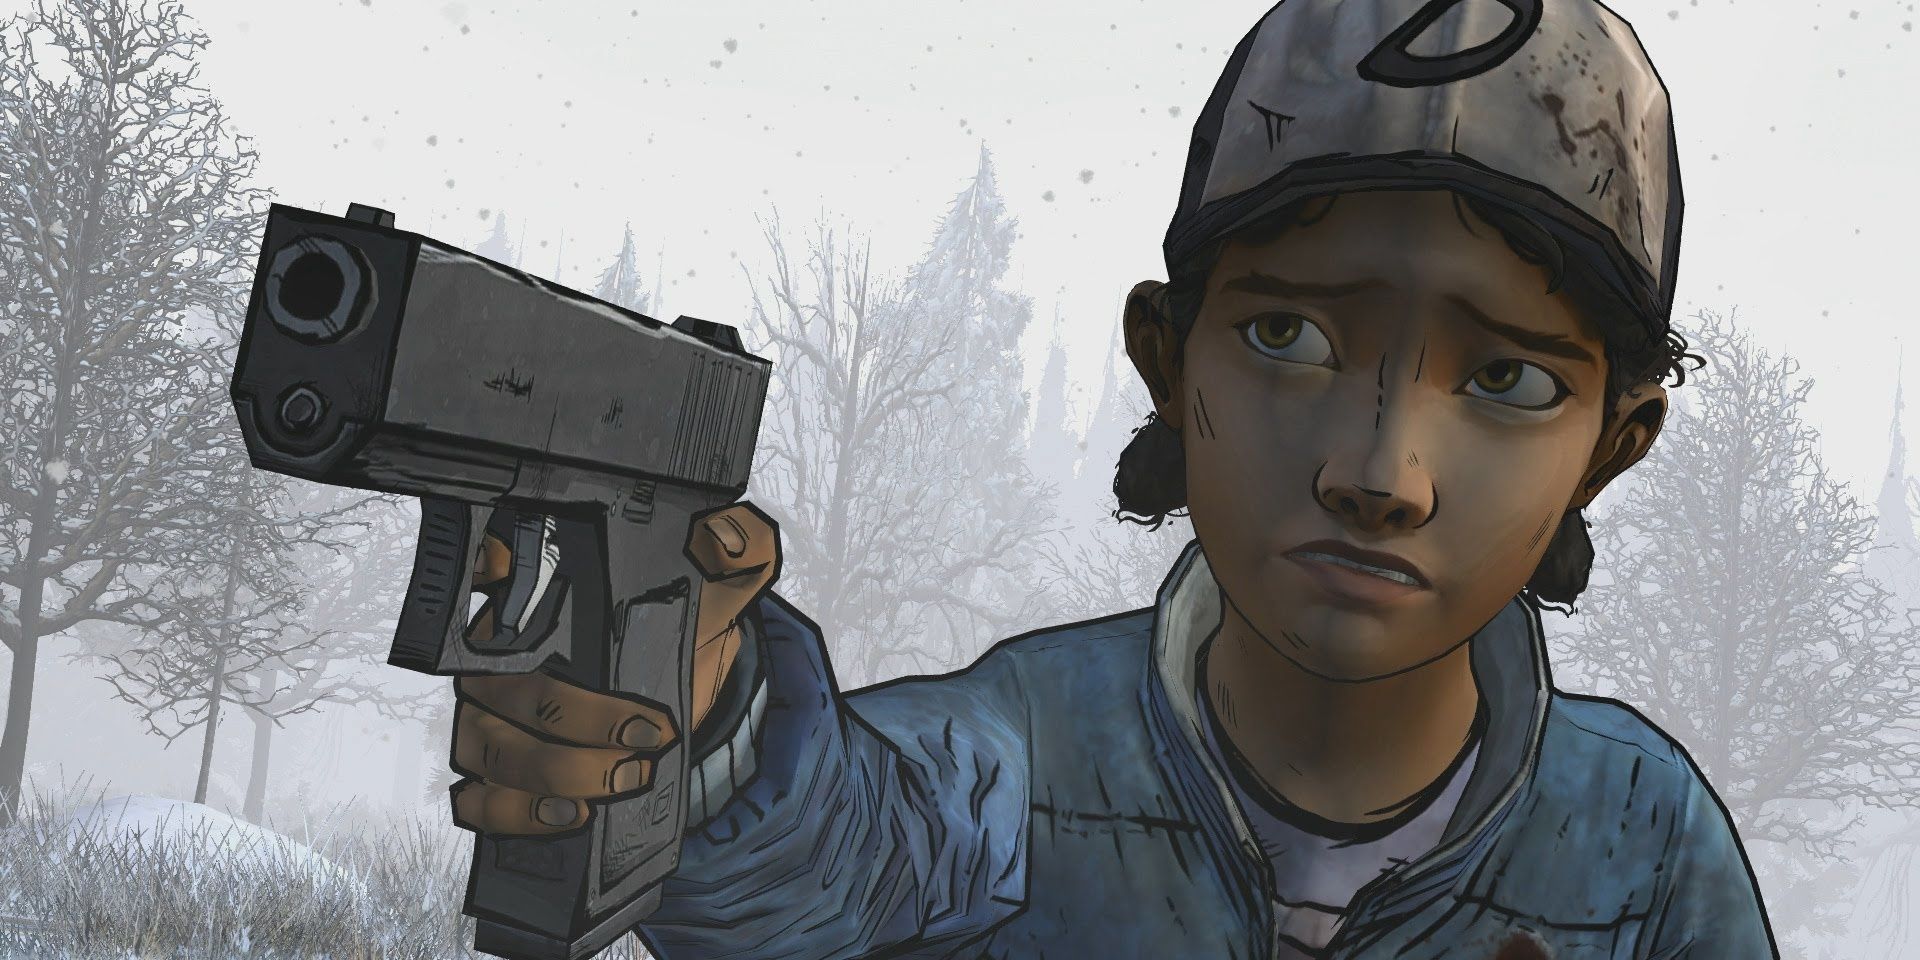 Clementine Holding A Gun From Telltale's The Walking Dead